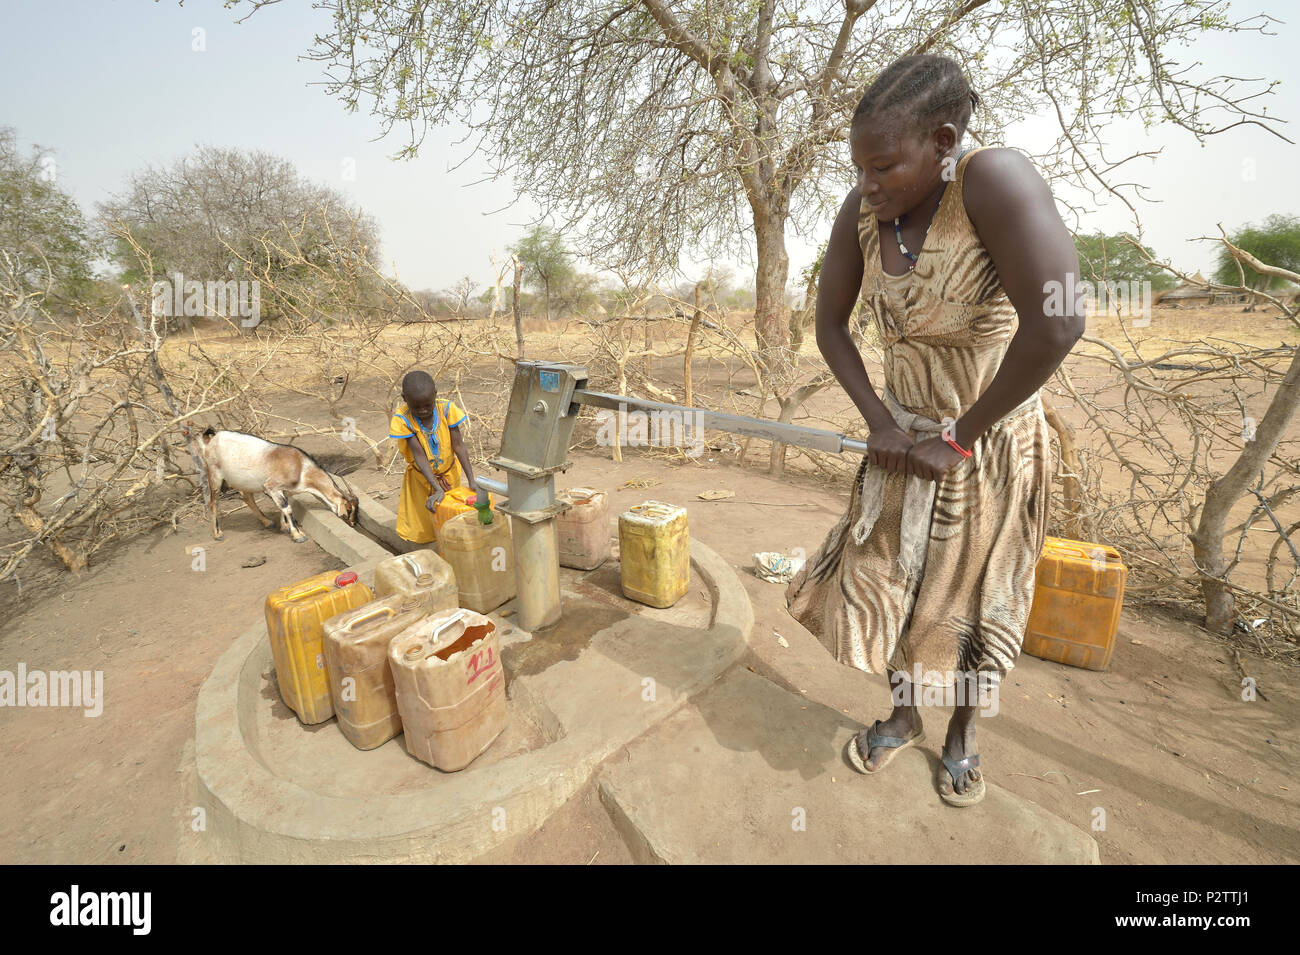 With help from her 8-year old daughter Atap, Atouc Dut pumps water from a well in Malek Miir, a village in South Sudan's Lol State. Stock Photo